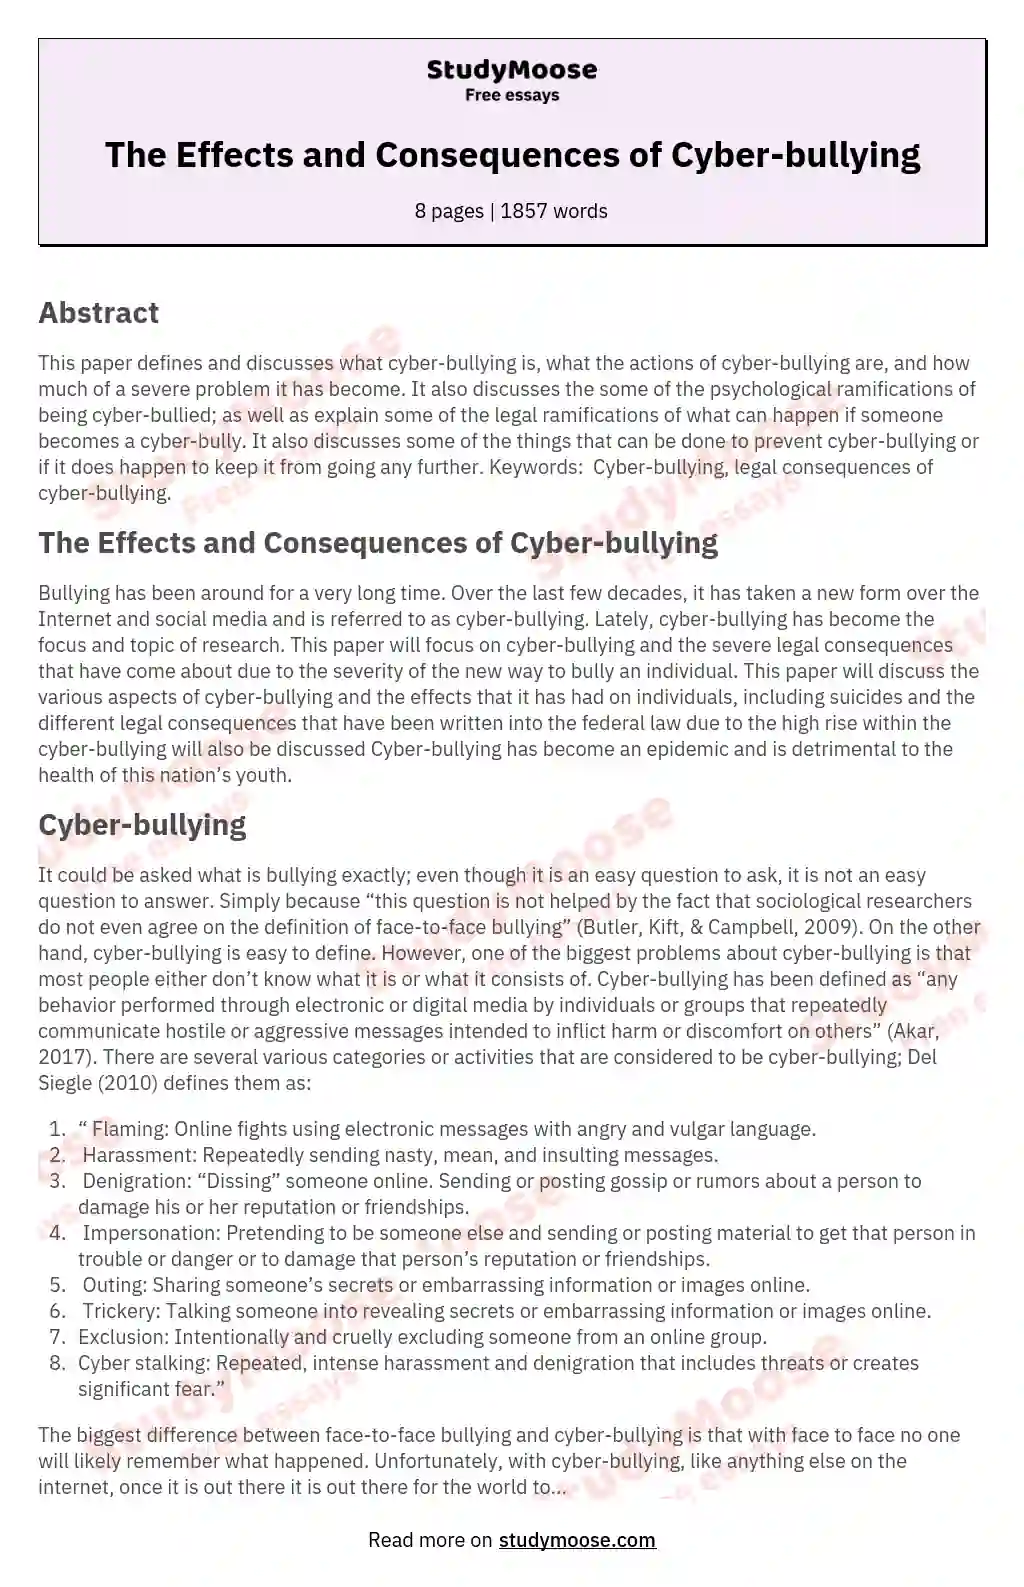 The Effects and Consequences of Cyber-bullying